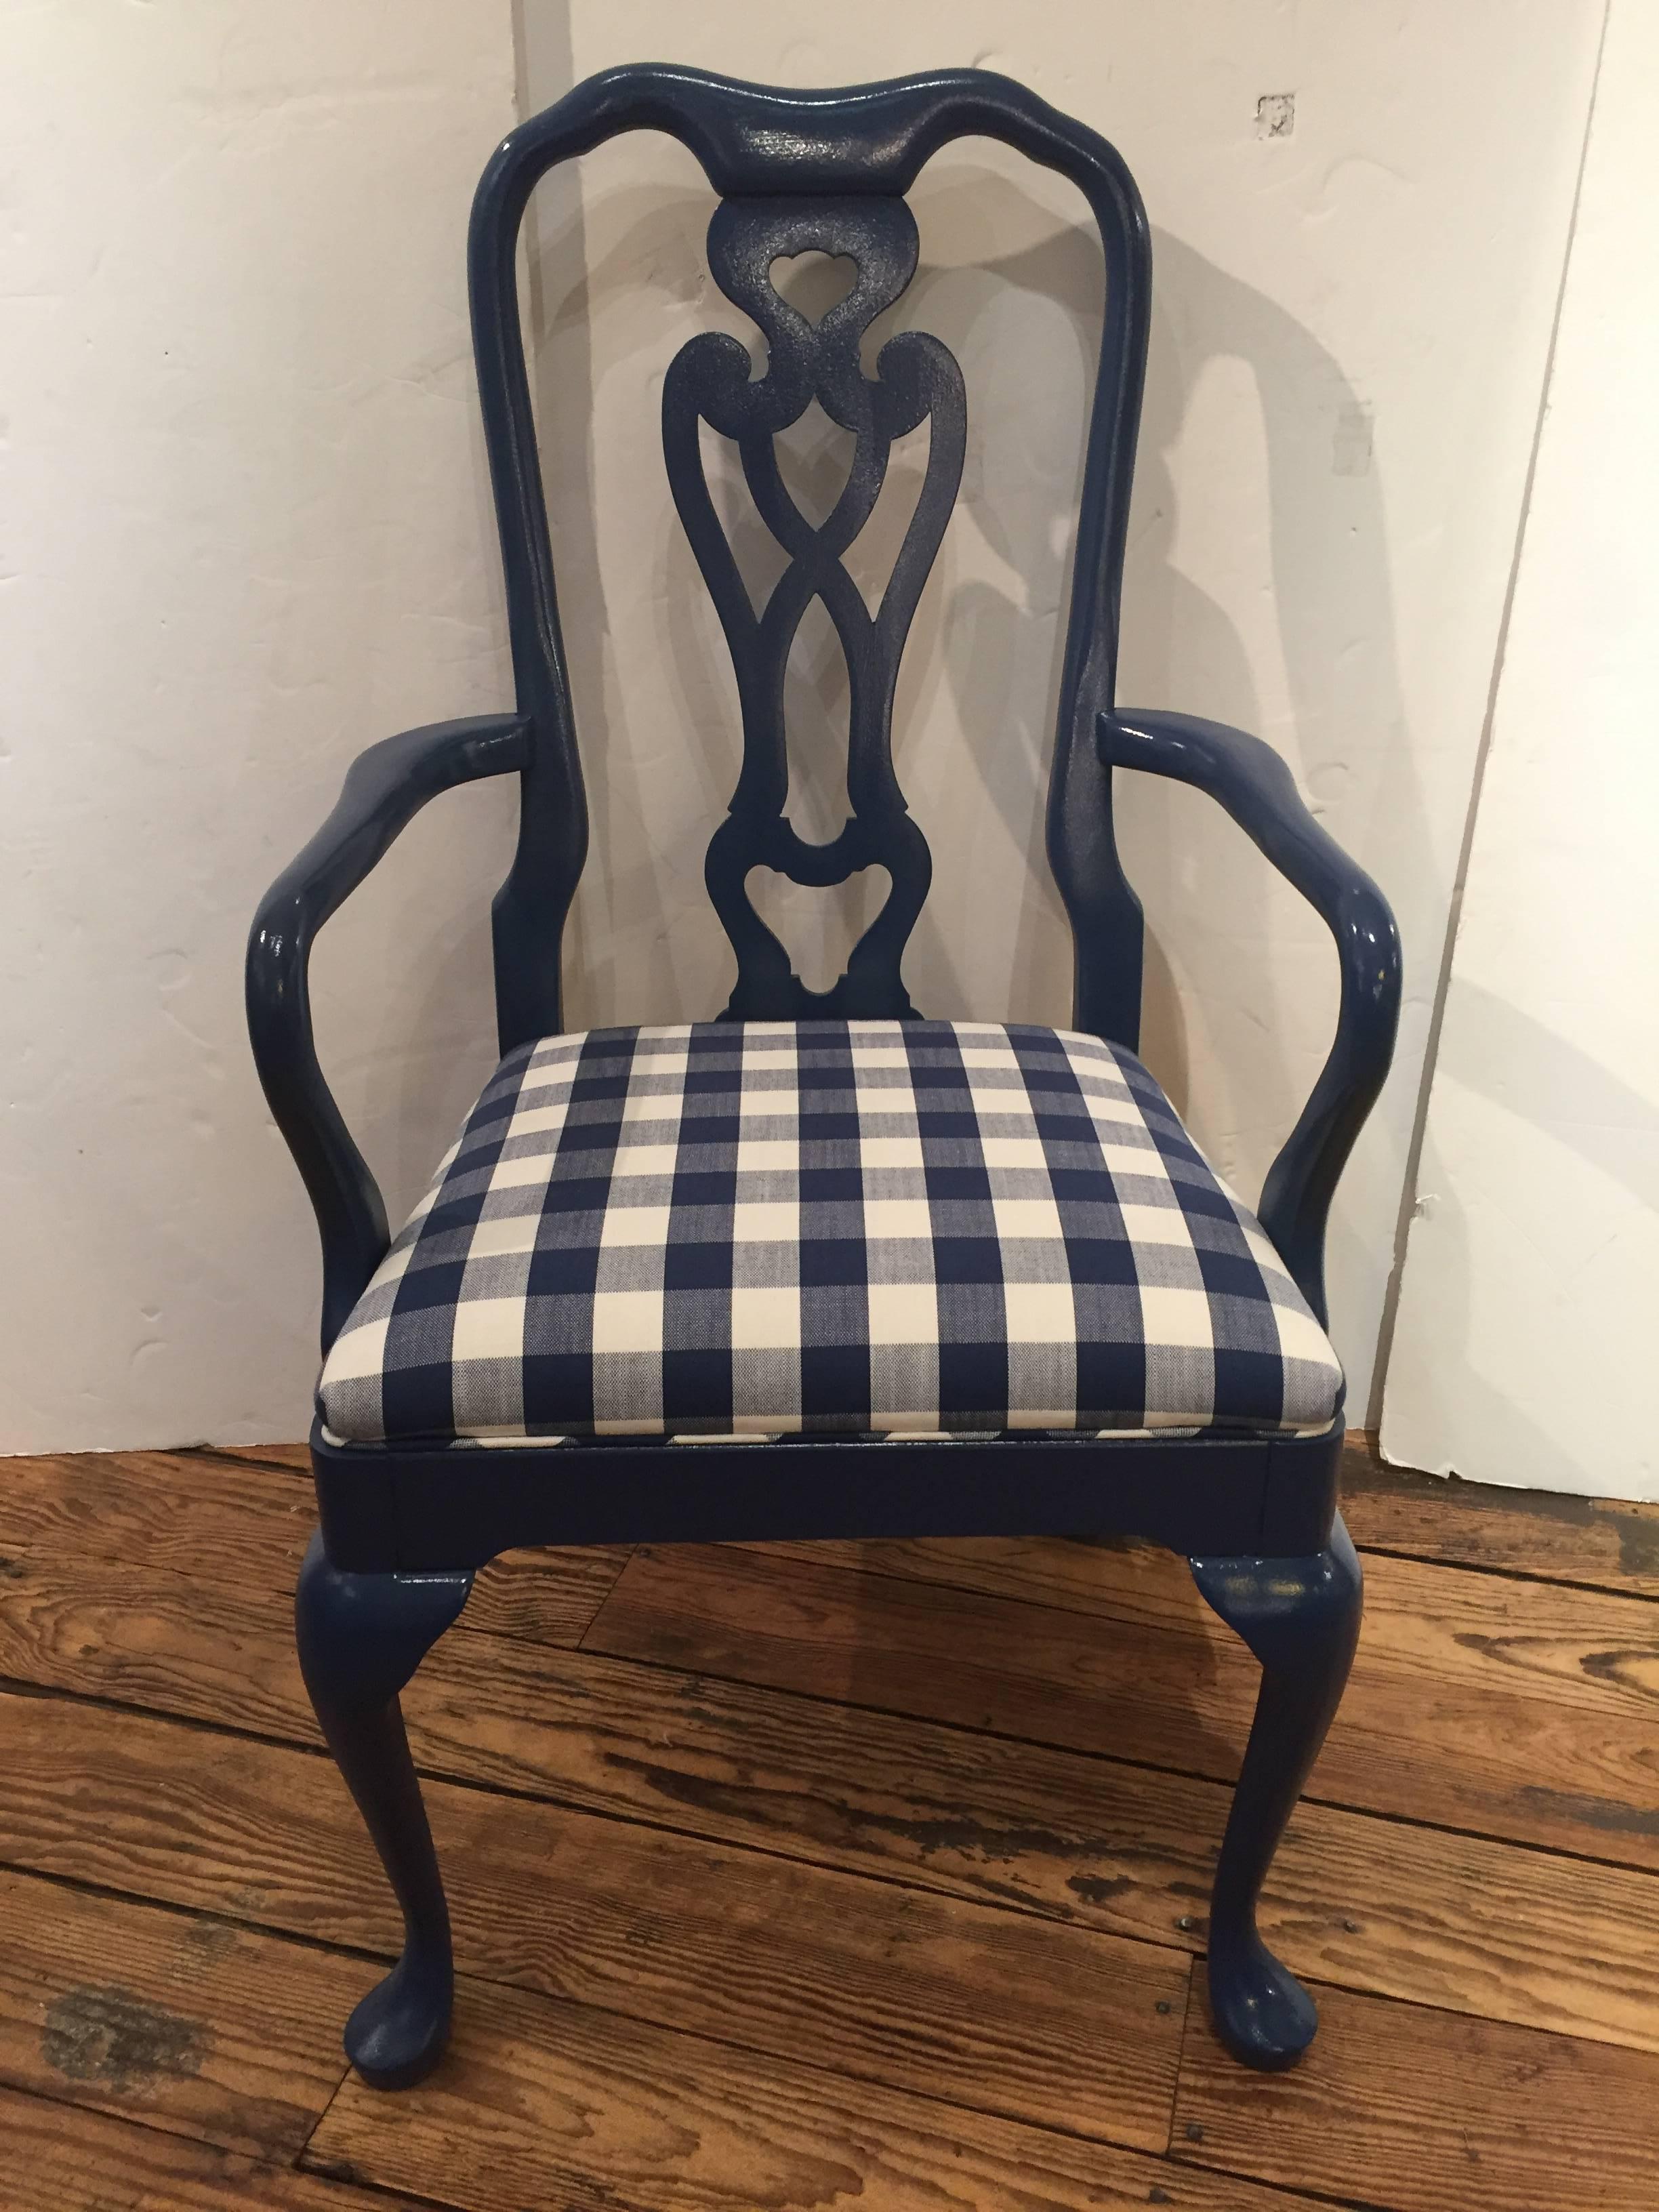 Classically styled set of six dining chairs including two arm and four side chairs, contemporized with Farrow and Ball Hague blue lacquered paint and seats upholstered in fresh blue and white checked Pierre Frey Gingham.

Measure: Armchair width